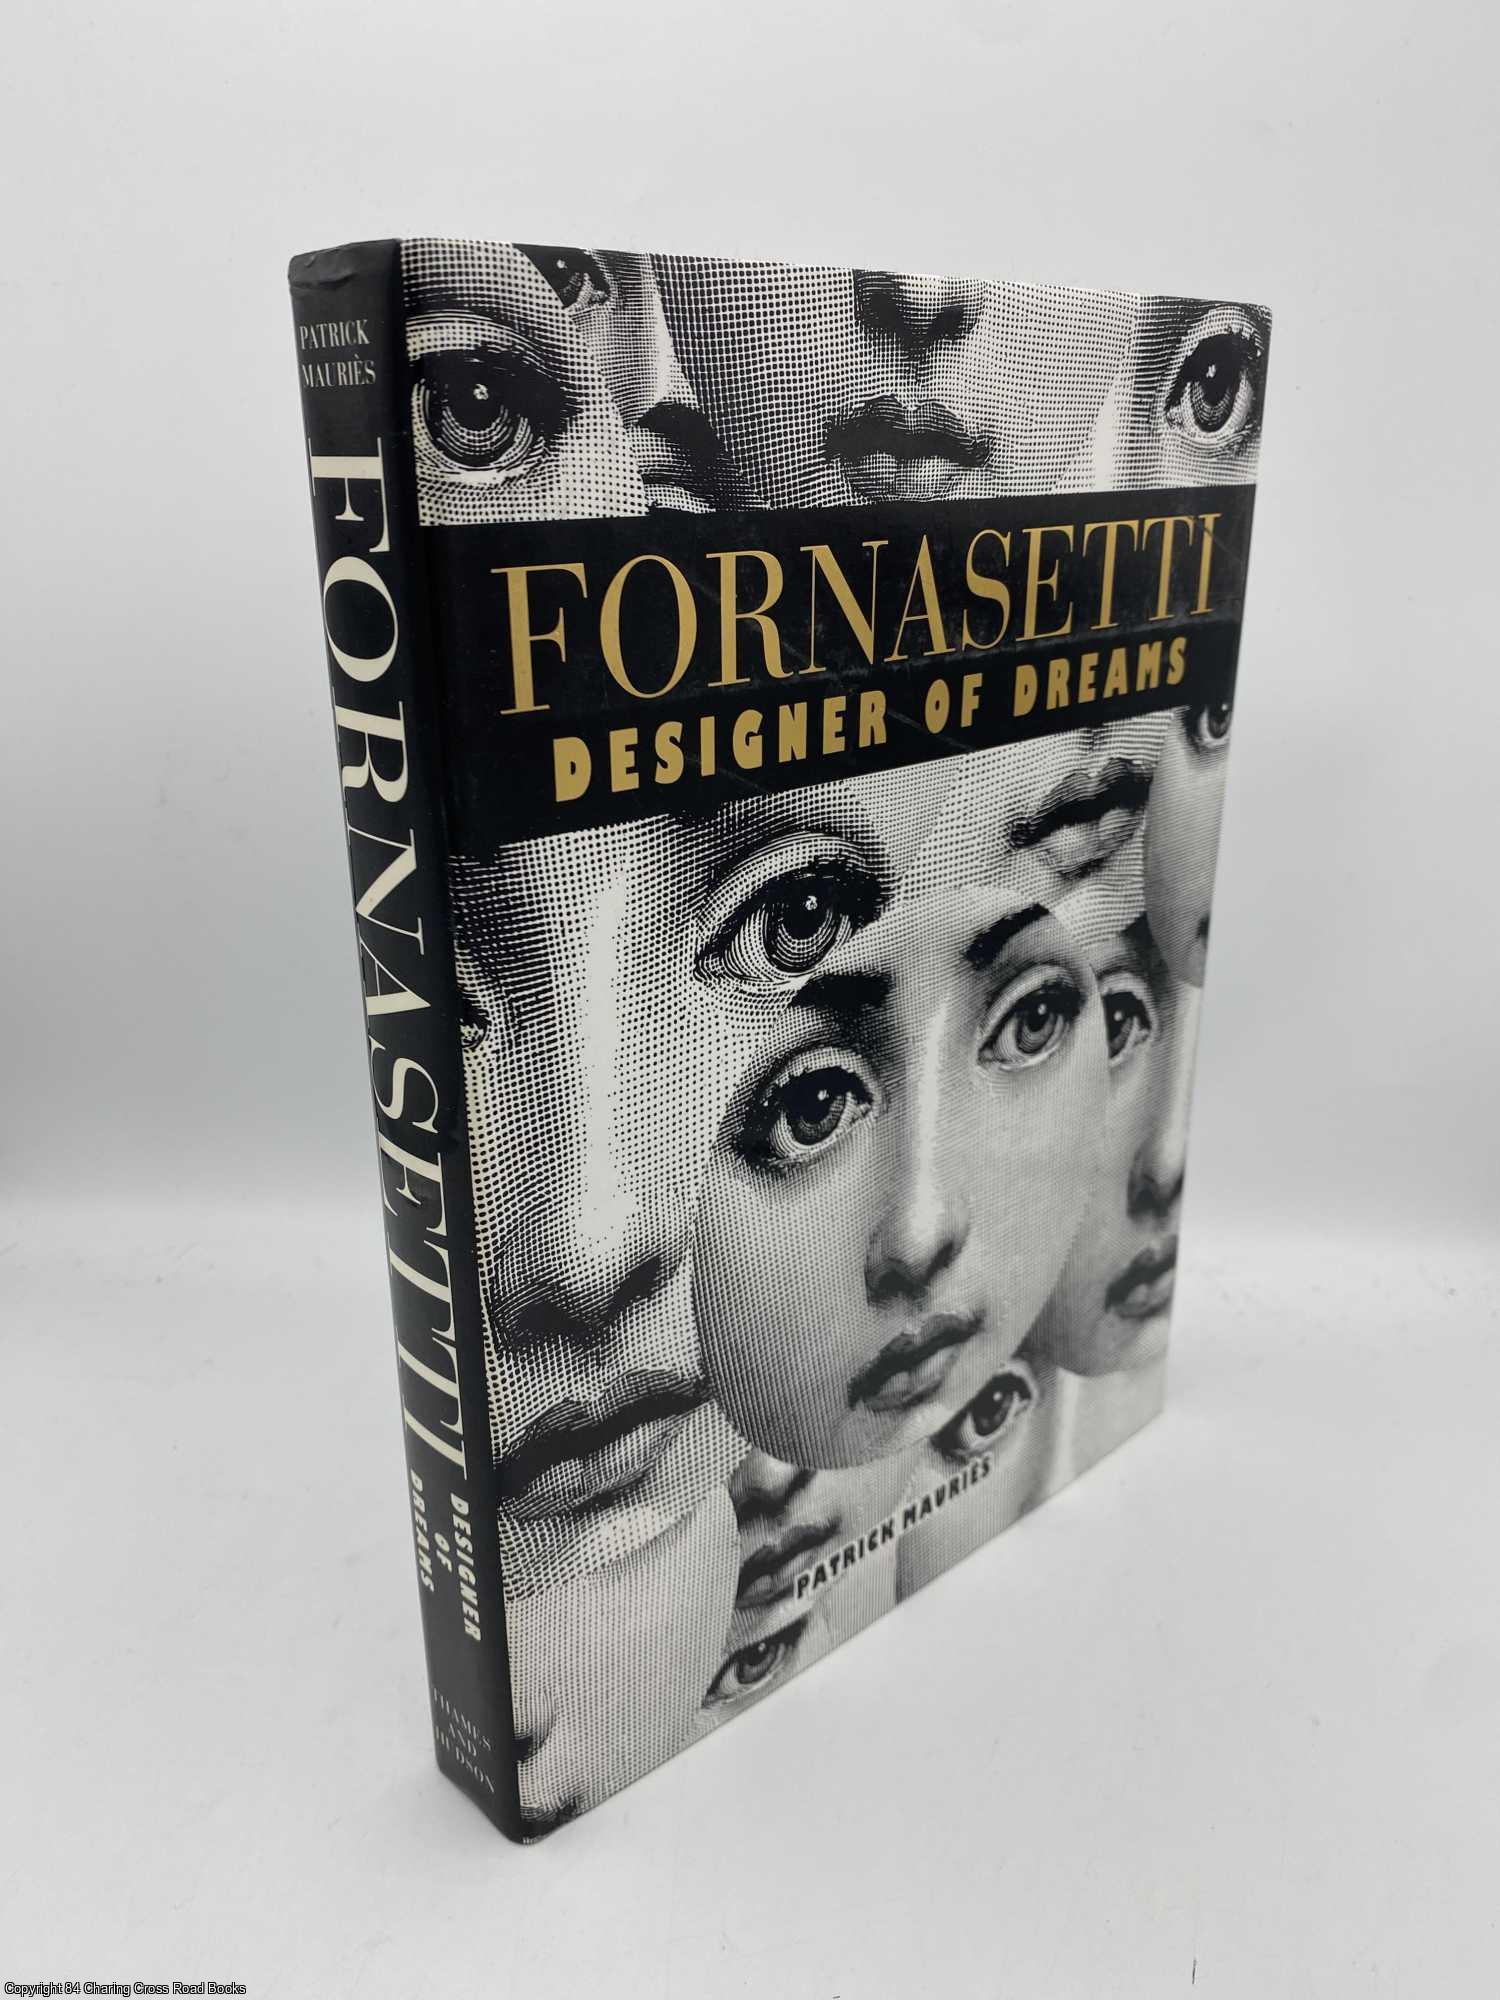 Fornasetti Designer of Dreams | Patrick Mauries | First Edition